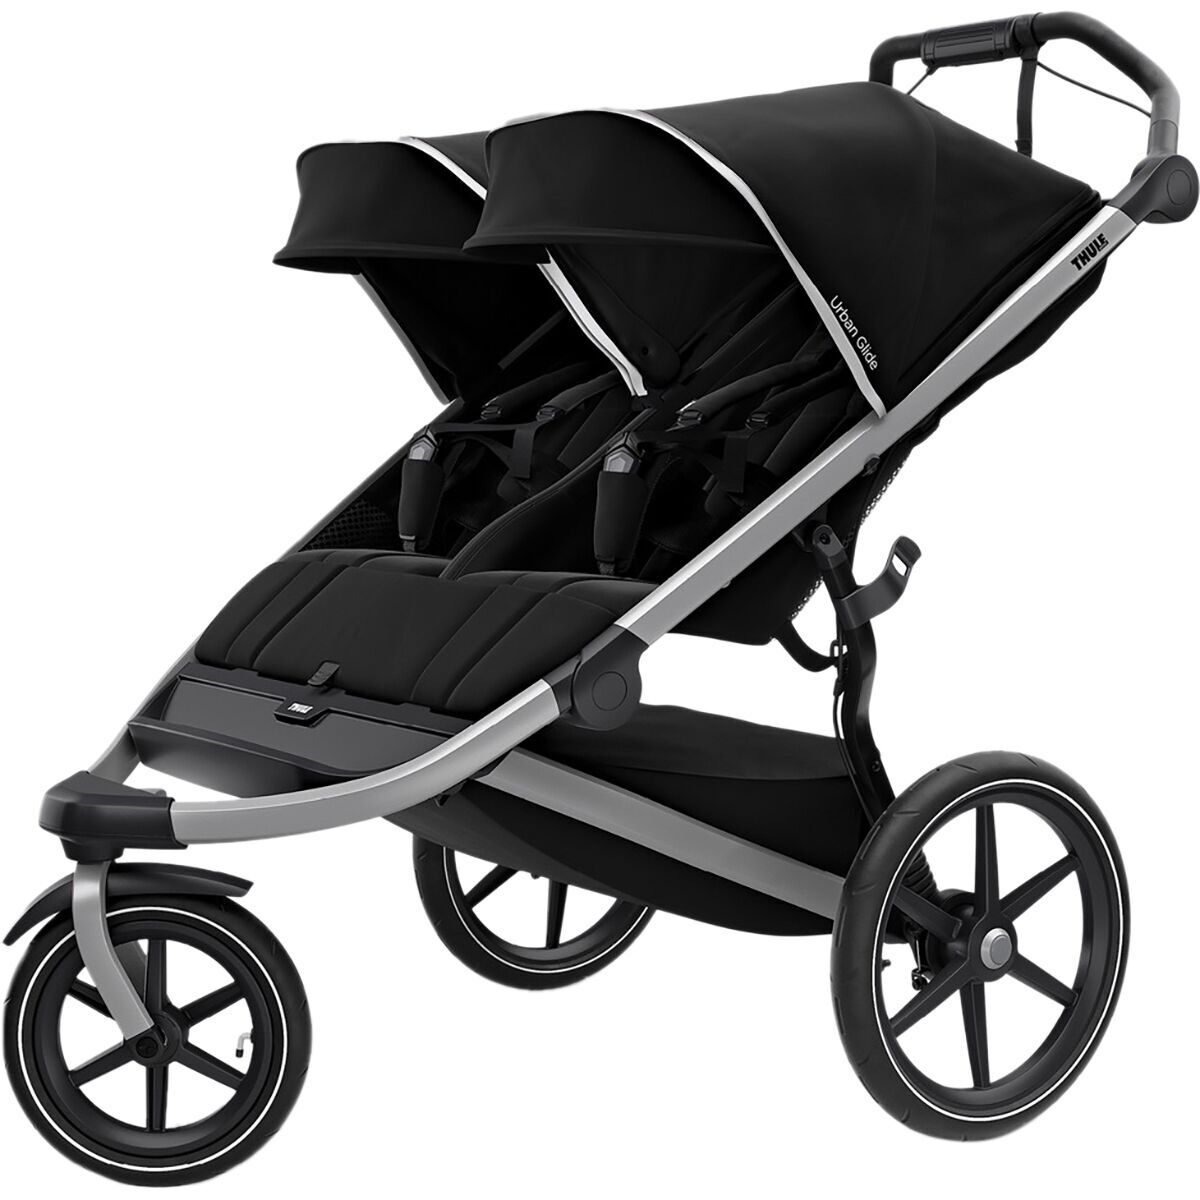 Thule Chariot Urban Glide 2 Double Stroller